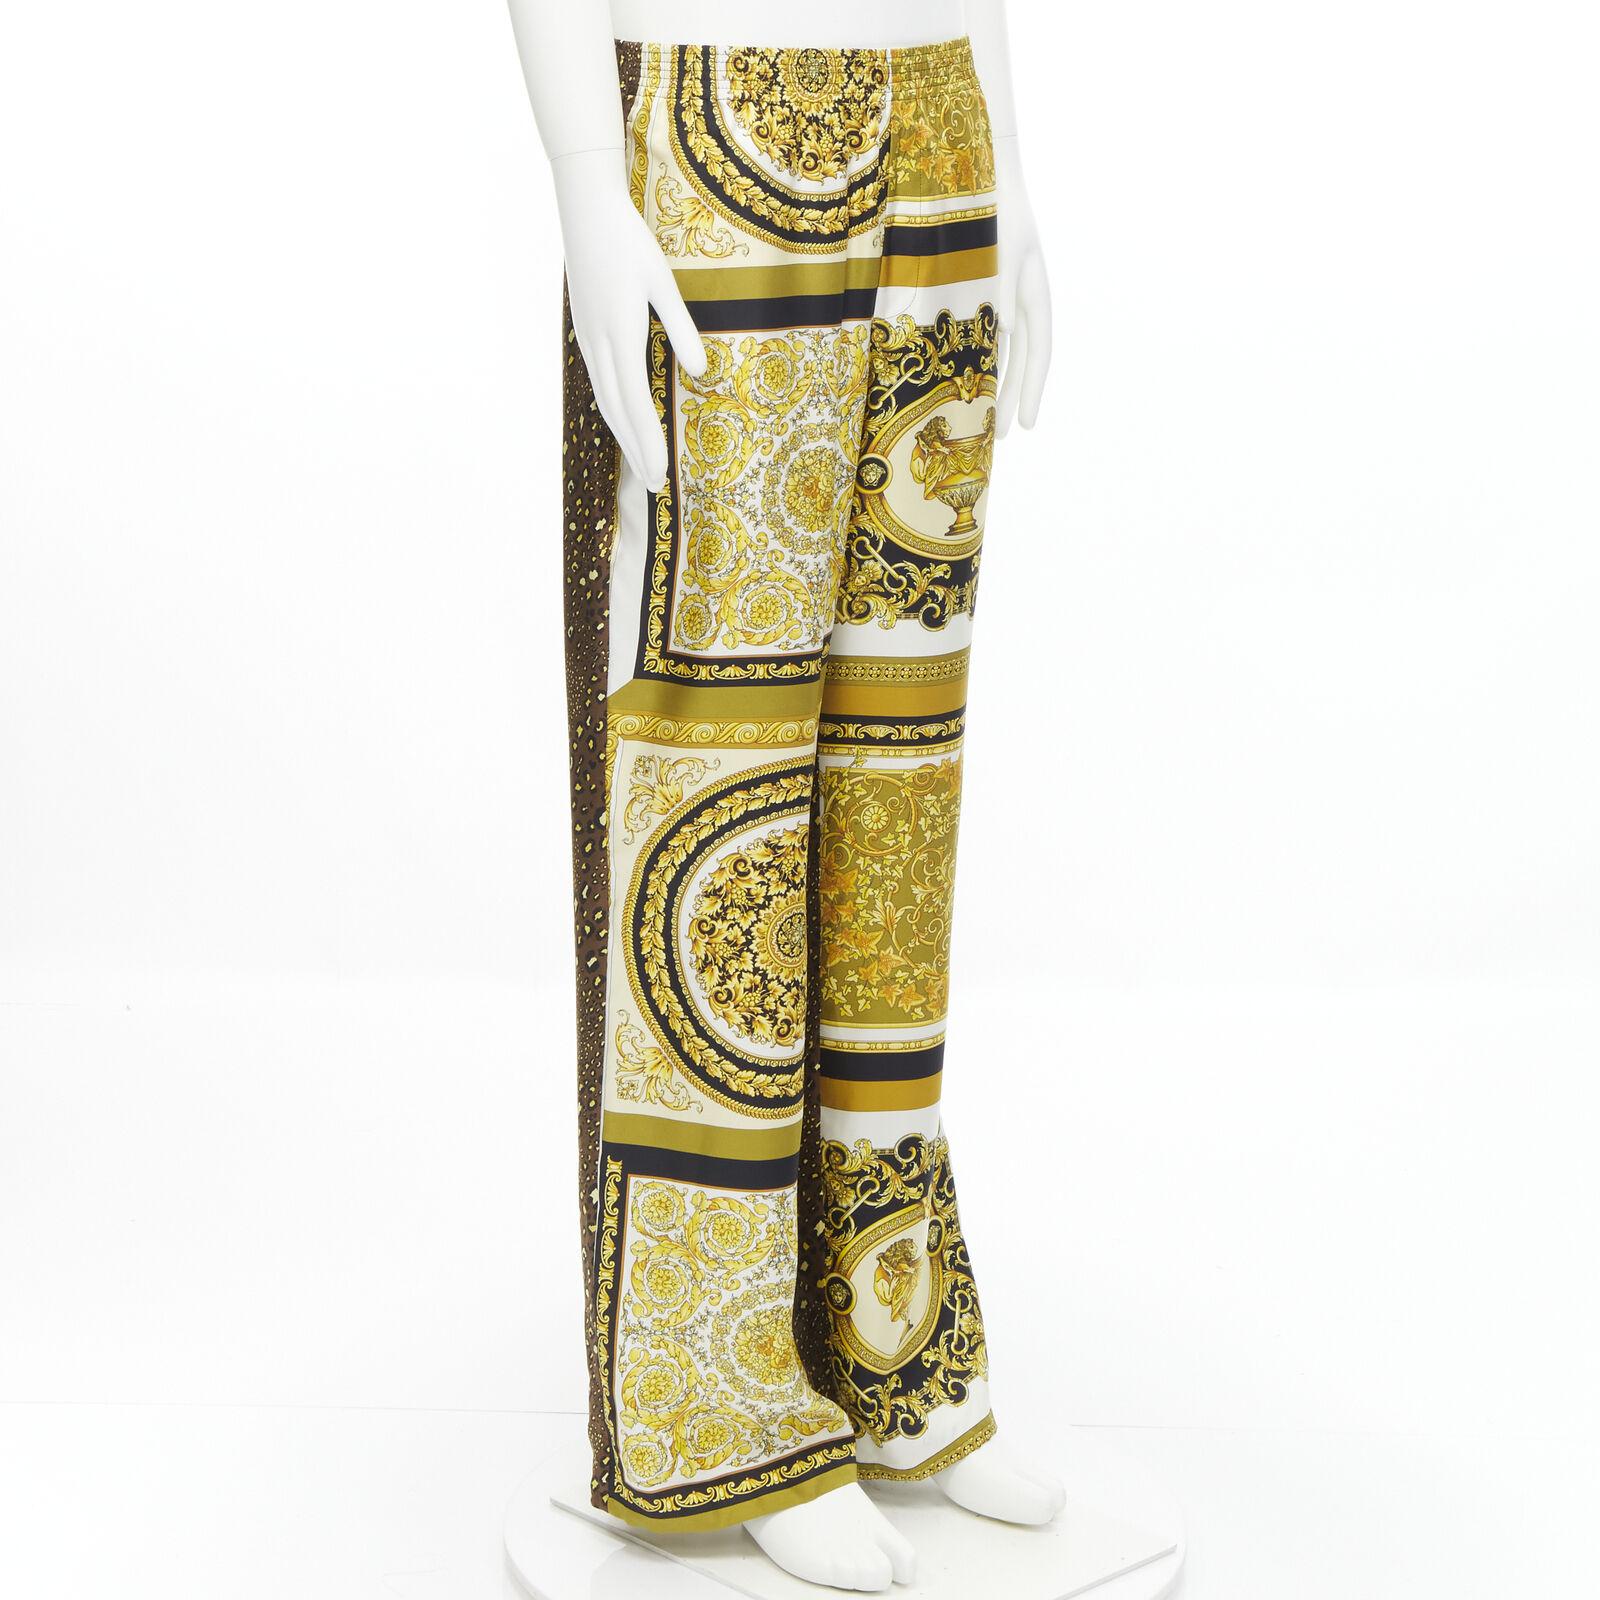 new VERSACE Mosaic Barocco 2021 silk gold baroque leopard relaxed pants IT50 L
Reference: TGAS/C00709
Brand: Versace
Designer: Donatella Versace
Model: A88676 1F00545 5N030
Collection: Resort 2021 Mosaic Barocco
Material: Silk
Color: Gold,